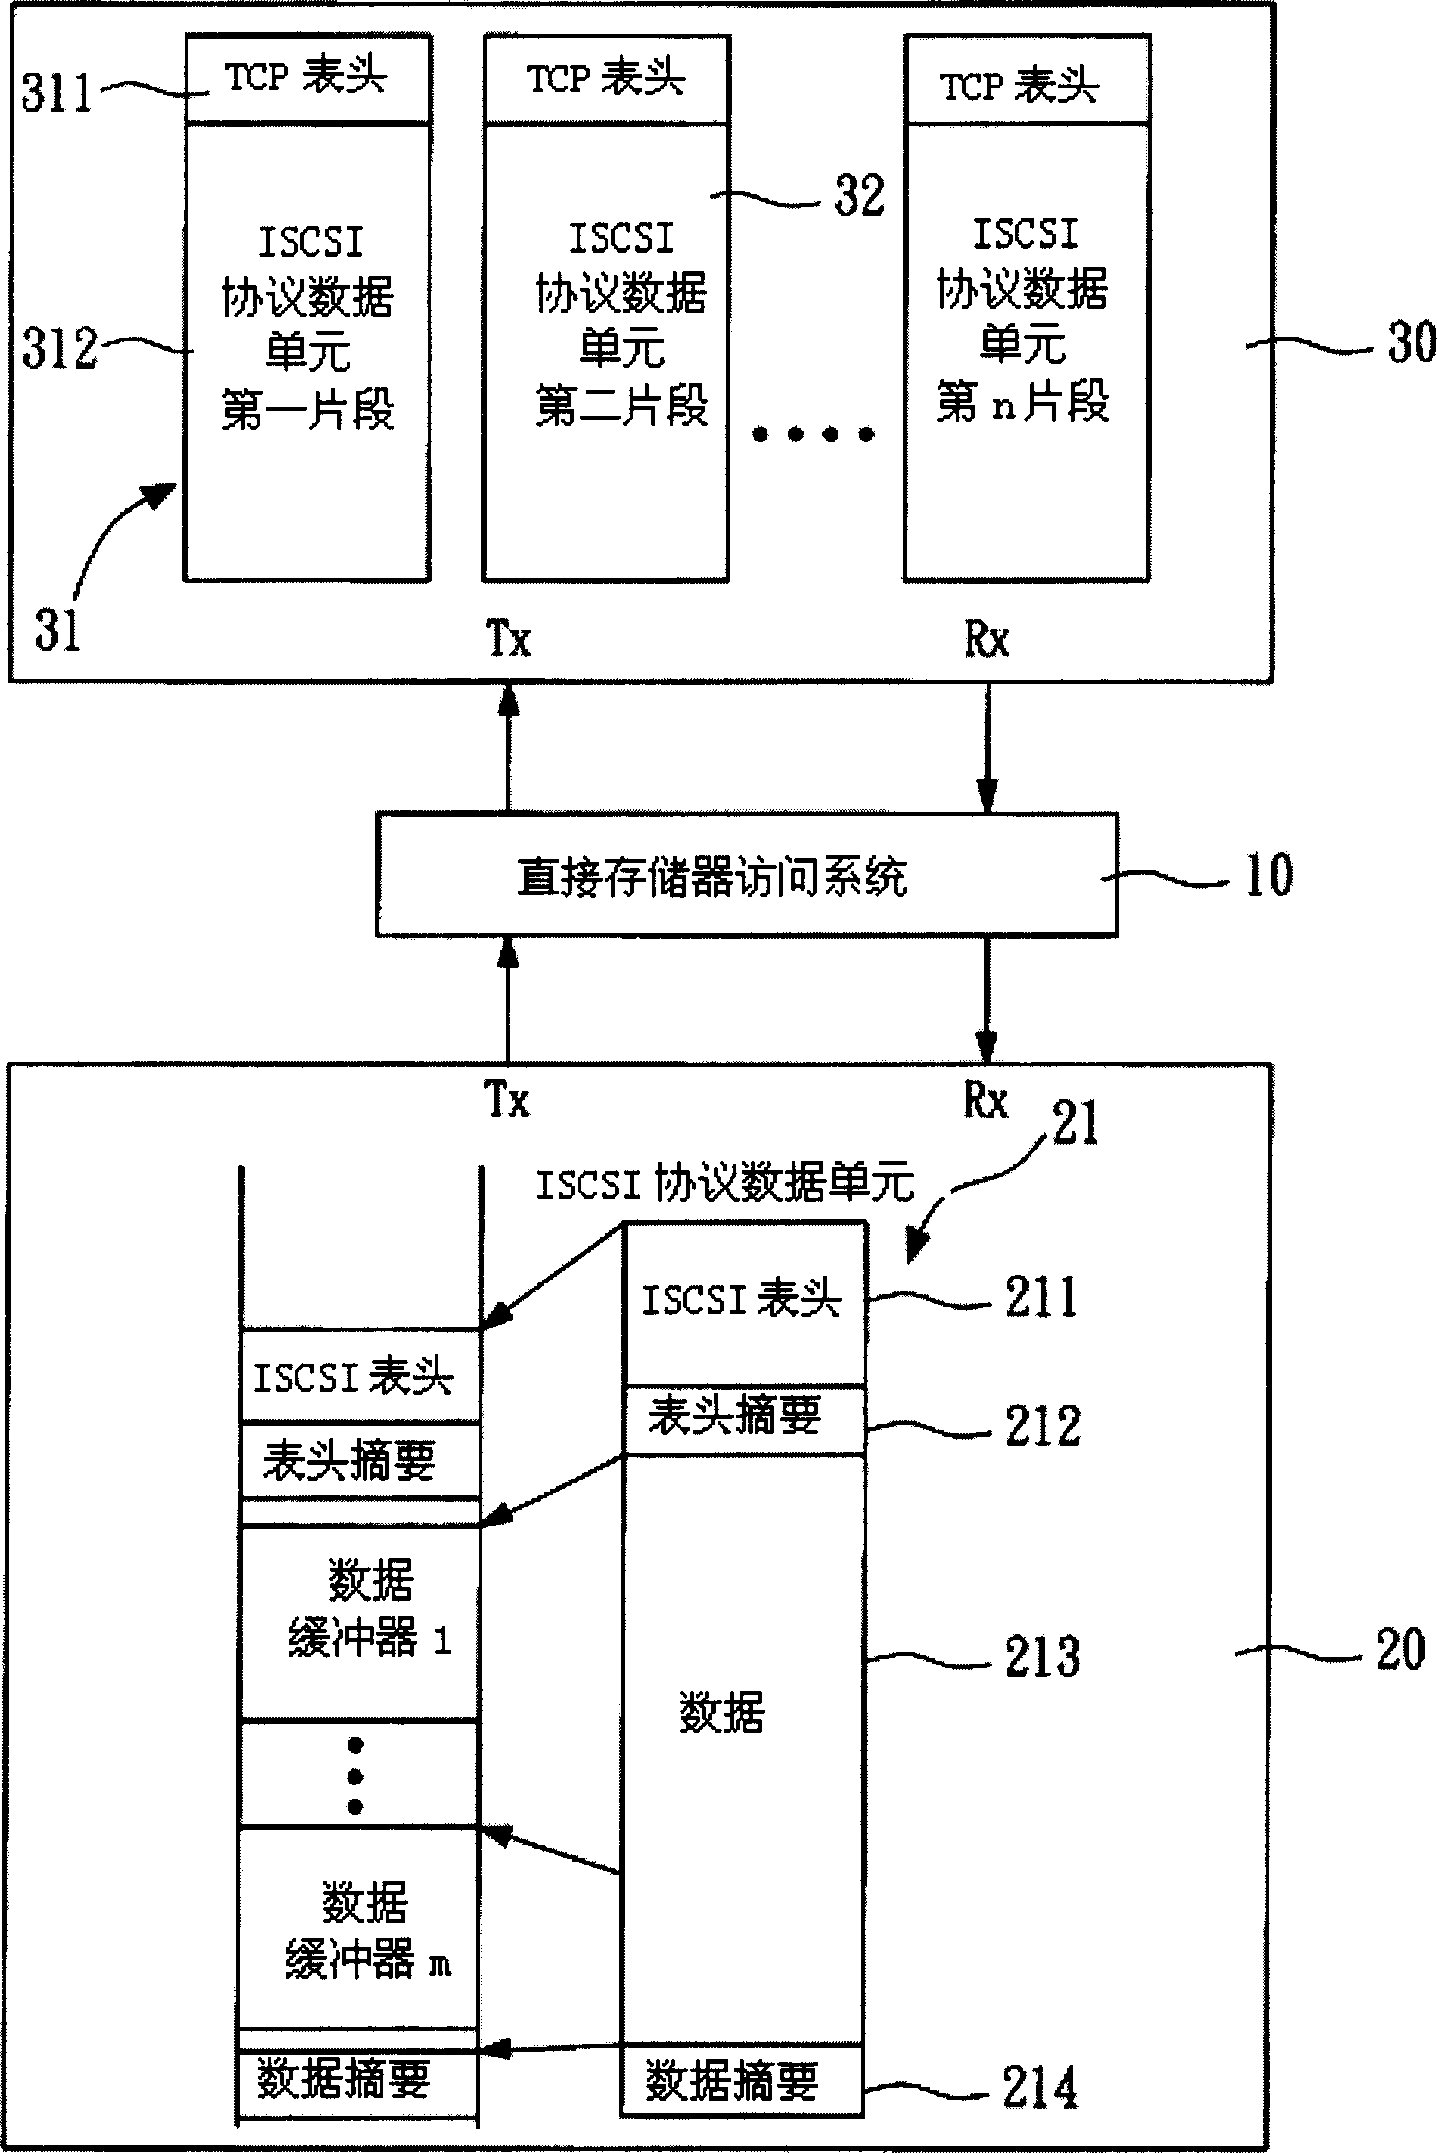 Direct internal memory access system for interface of internet small-sized computer system